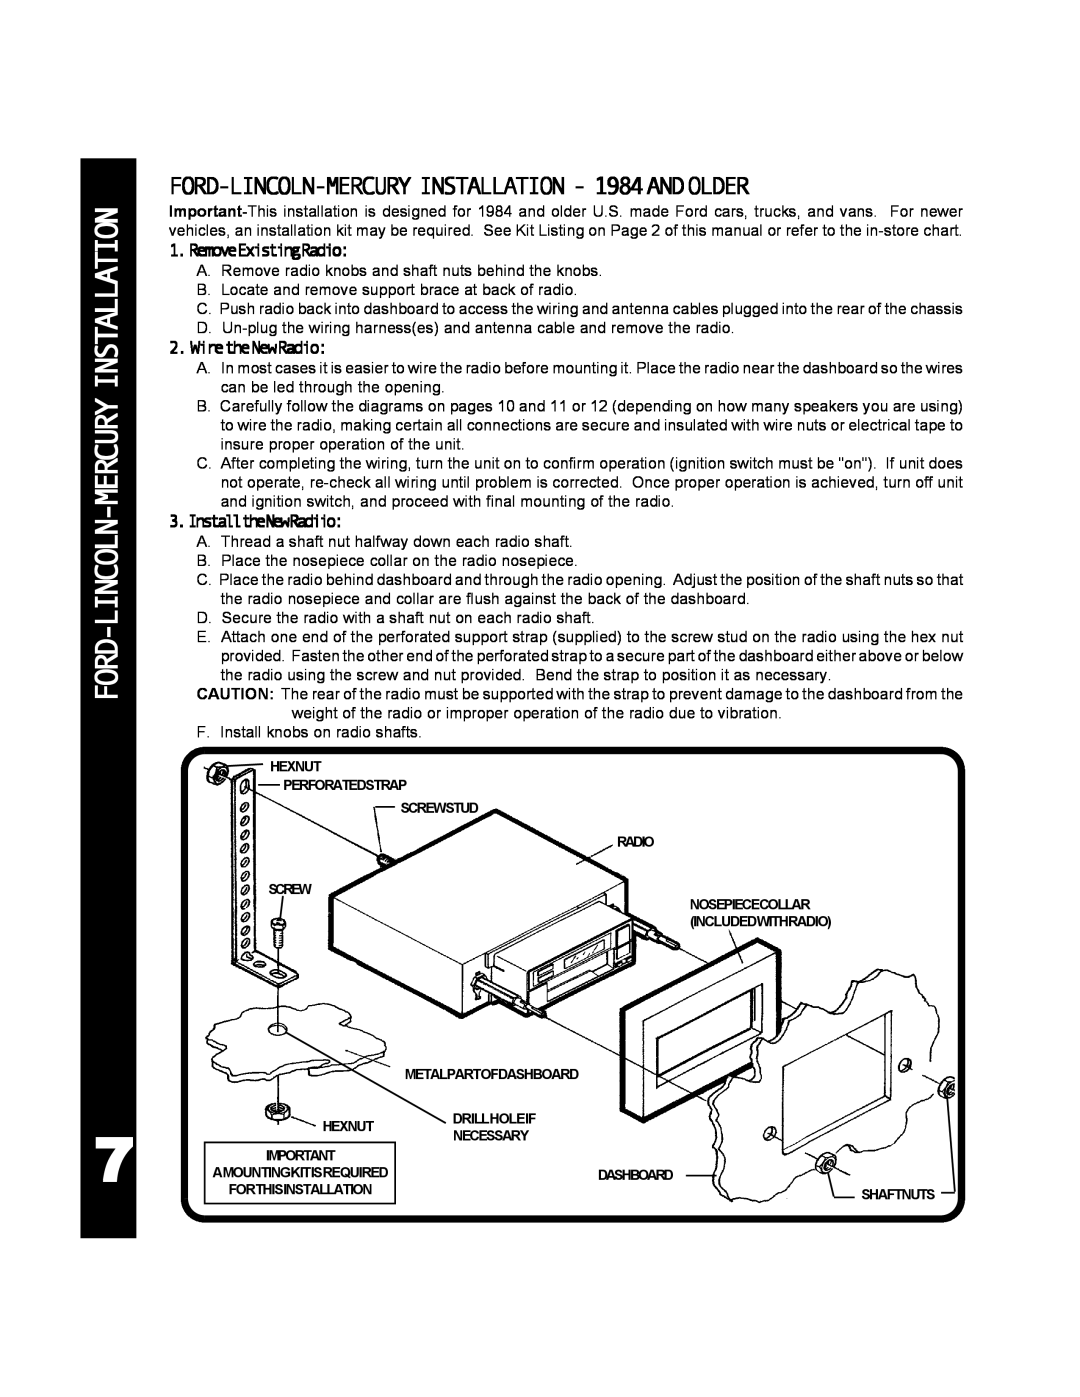 Audiovox 990 manual Ford-Lincoln-Mercuryinstallation, FORD-LINCOLN-MERCURYINSTALLATION - 1984ANDOLDER, RemoveExistingRadio 